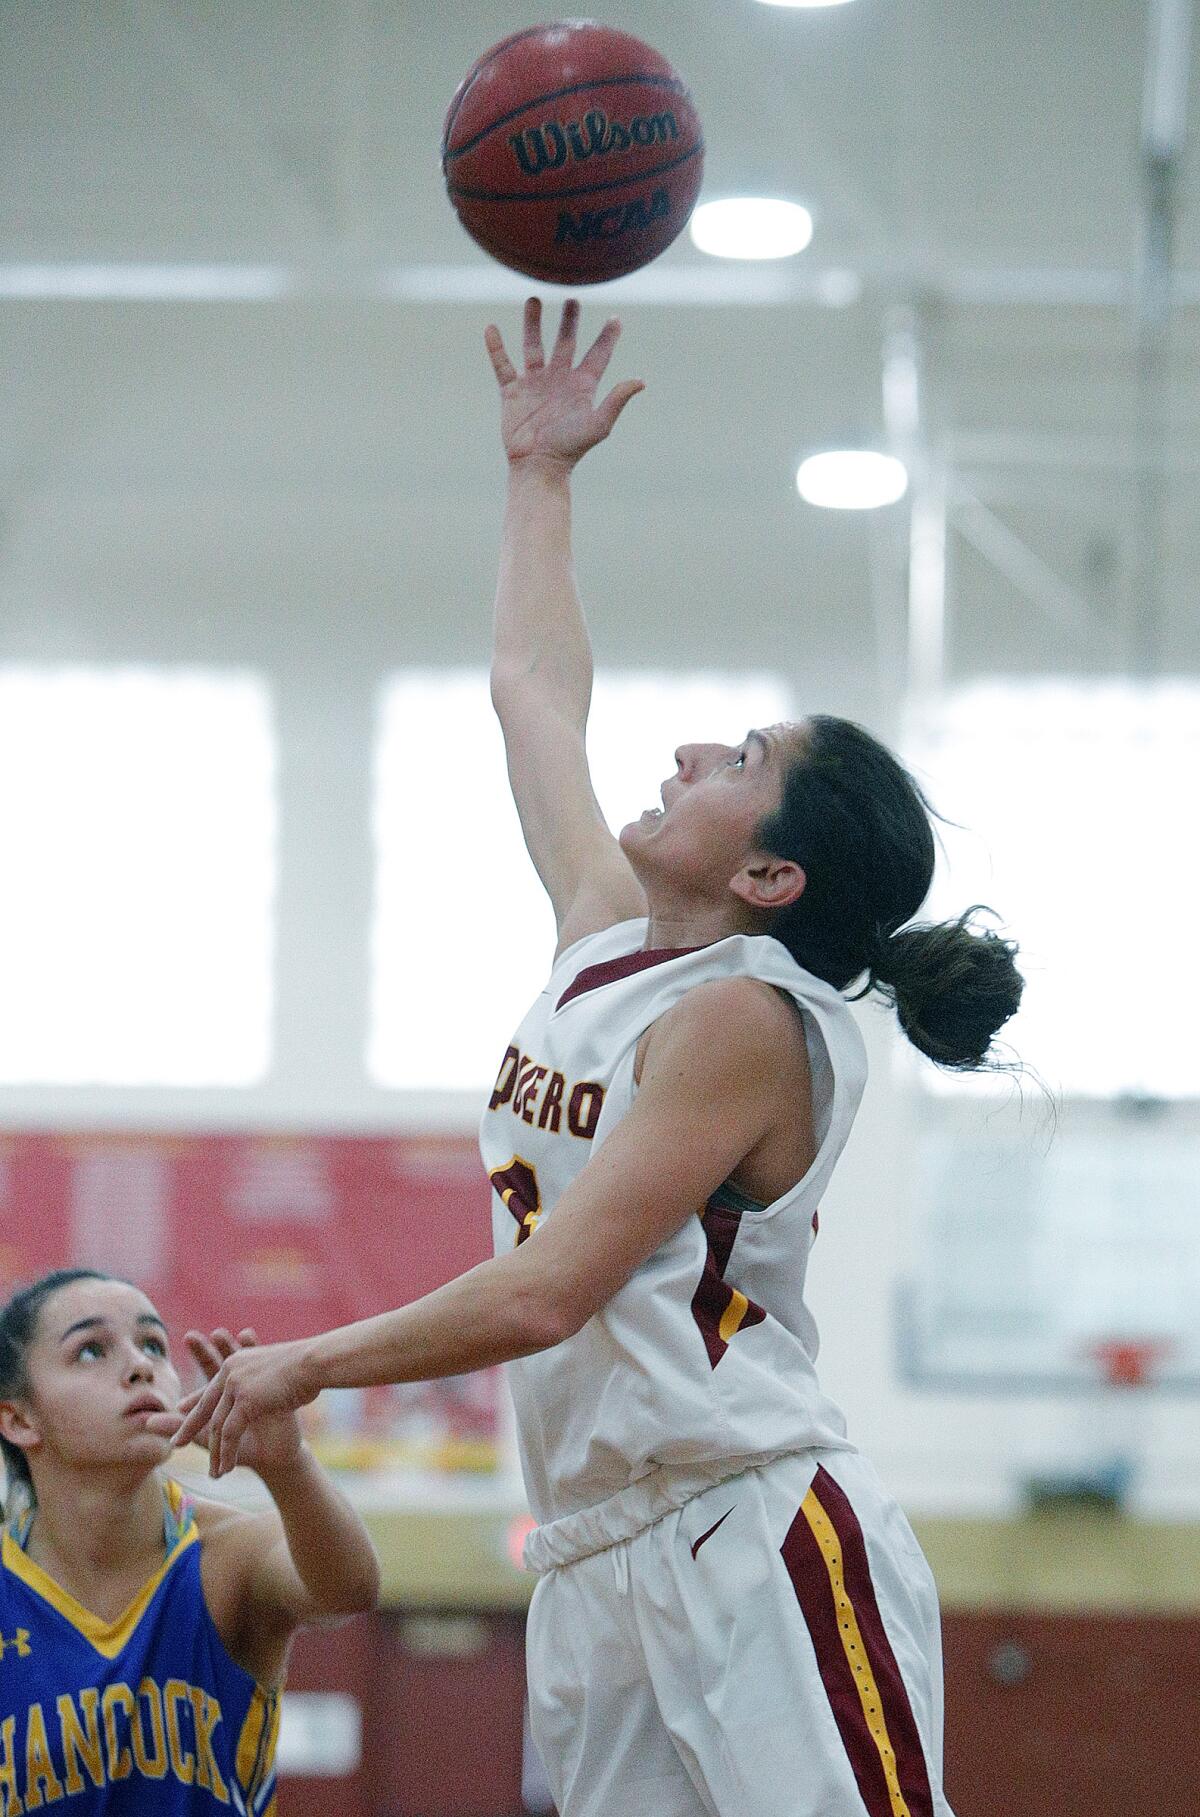 Glendale Community College's Vicky Oganyan shoots a reverse layup against Allan Hancock in a women's basketball game in the annual Vaquero basketball tournament at Glendale Community College on Wednesday, December 18, 2019. Oganyan is the long-time head coach of the Burroughs High School girls' basketball team and is playing for GCC while taking classes at GCC. Glendale won the game to improve to 10-1 on the season by defeating Allan Hancock 58-50.